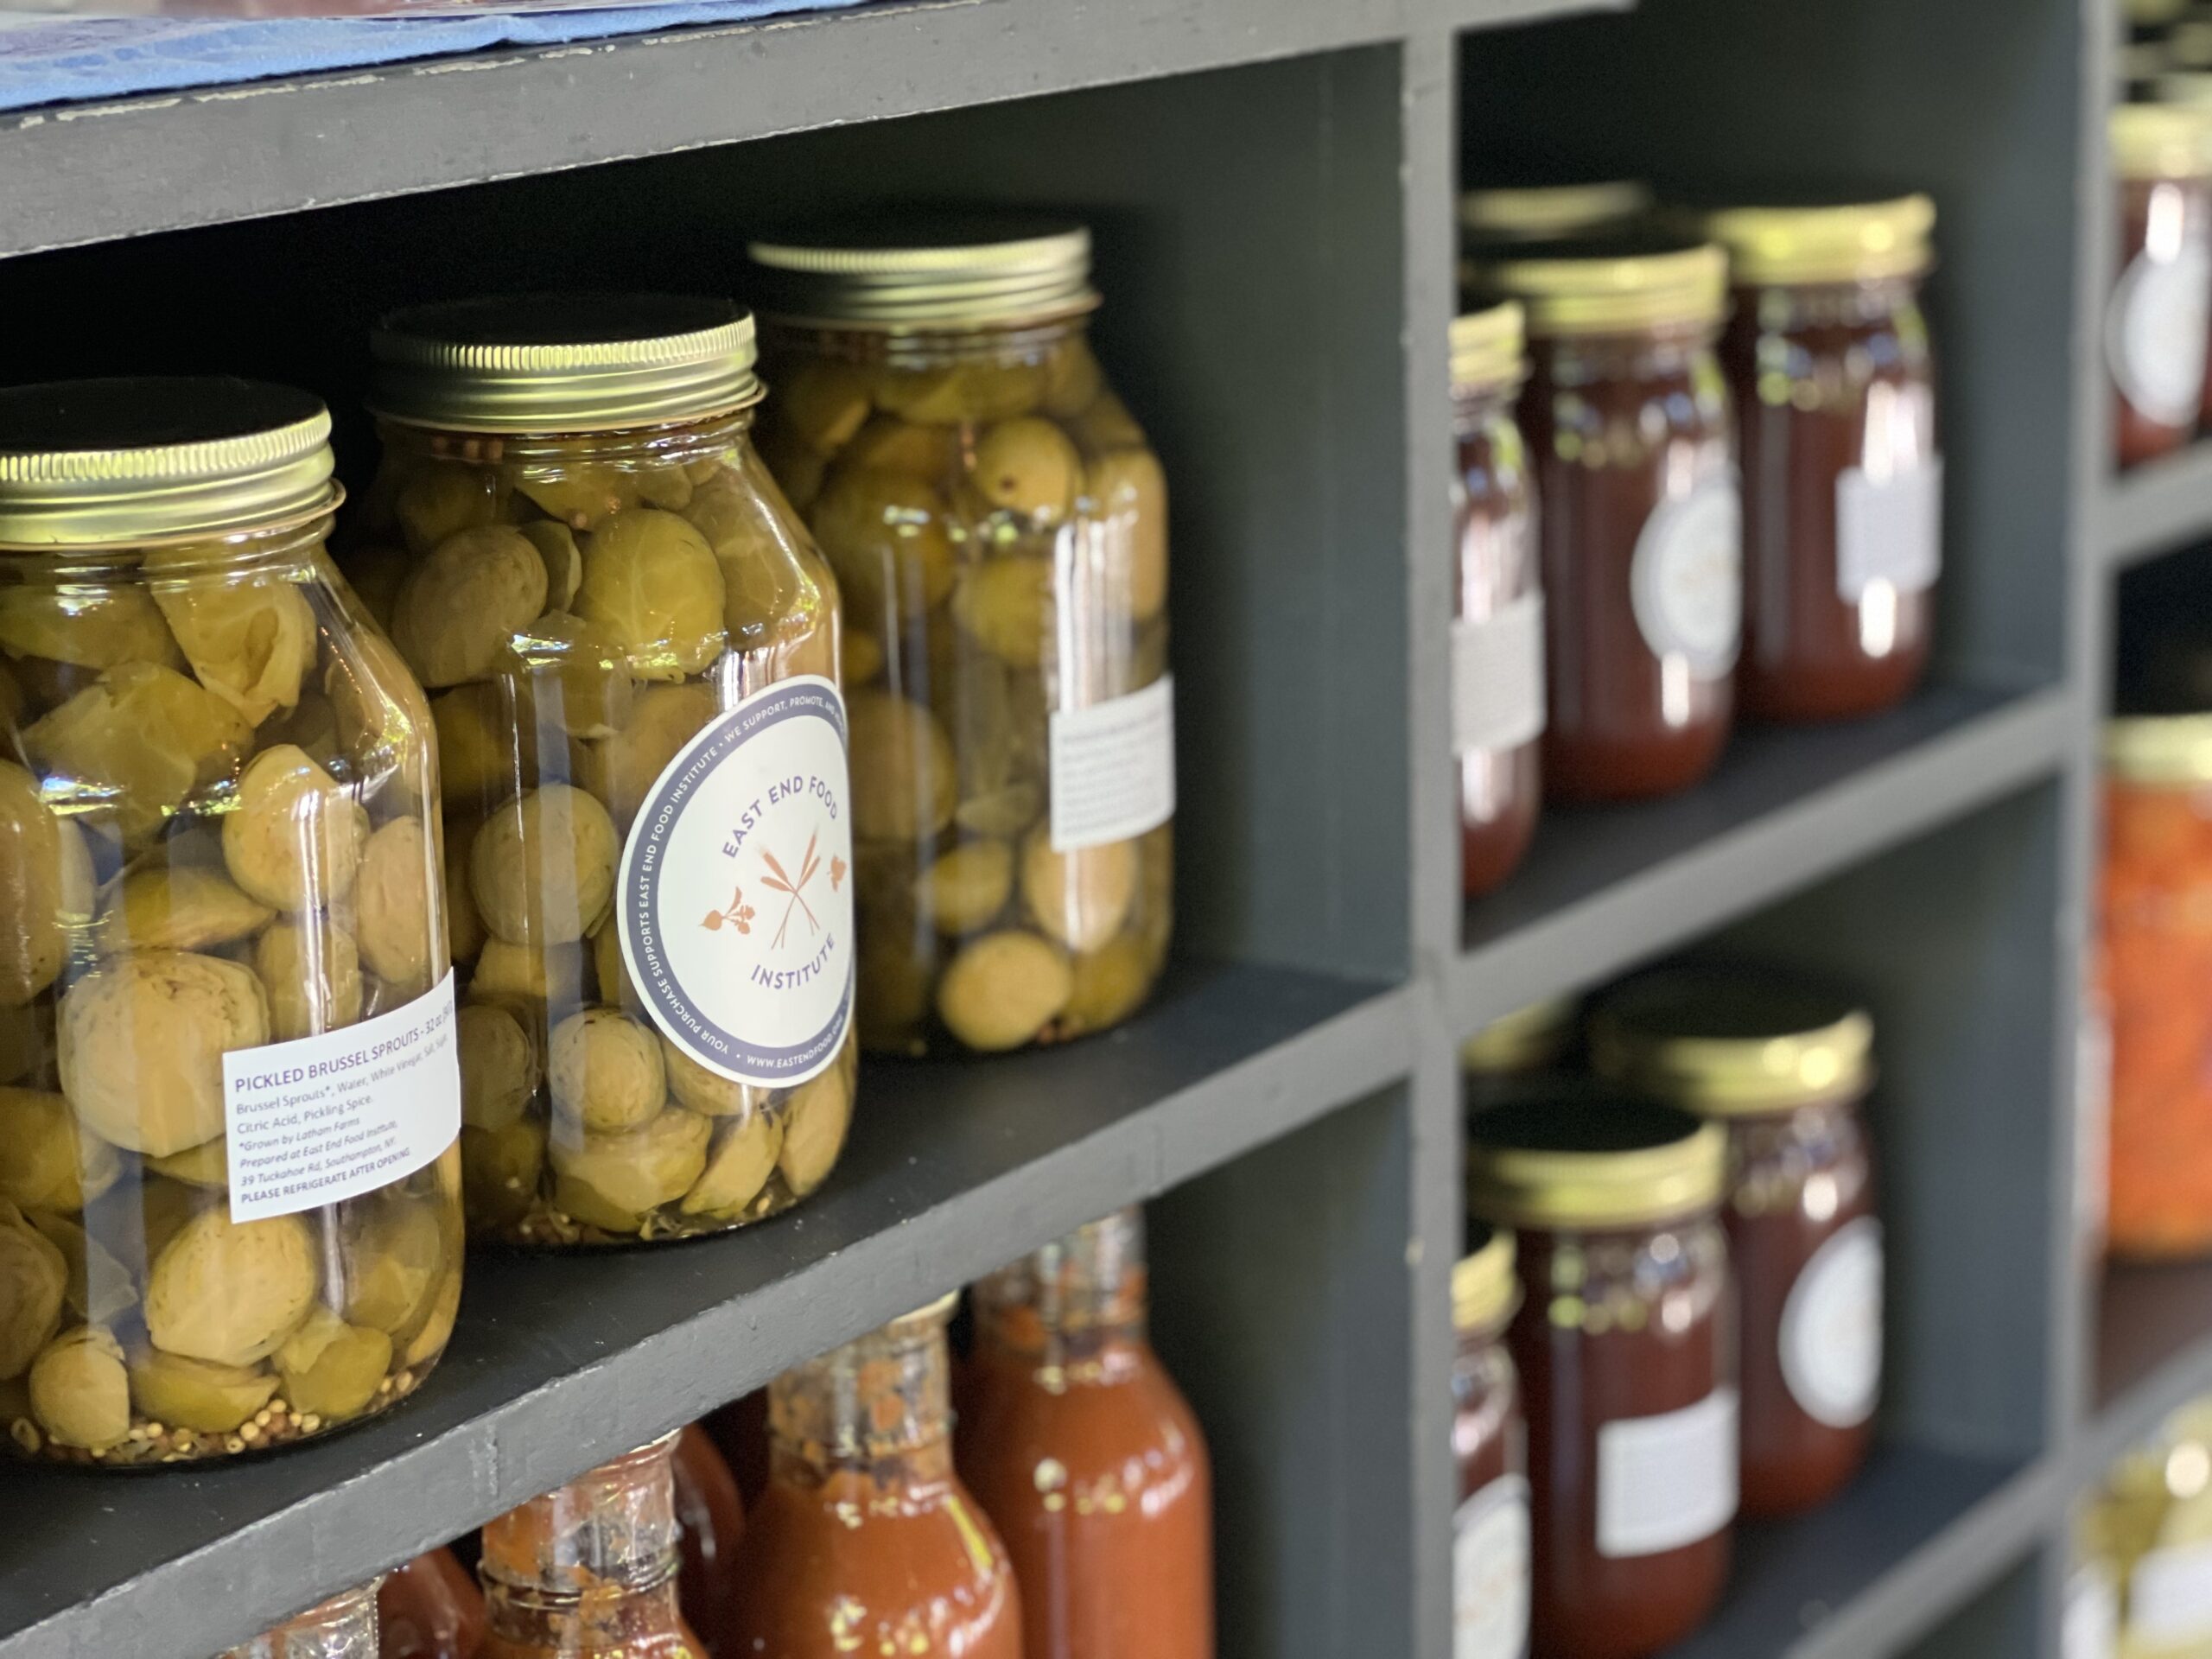 The nonprofit East End Food Institute hopes that its new project, the East End Food Hub, will help centralize aggregation, processing and distribution of local foods. COURTESY EAST END FOOD INSTITUTE